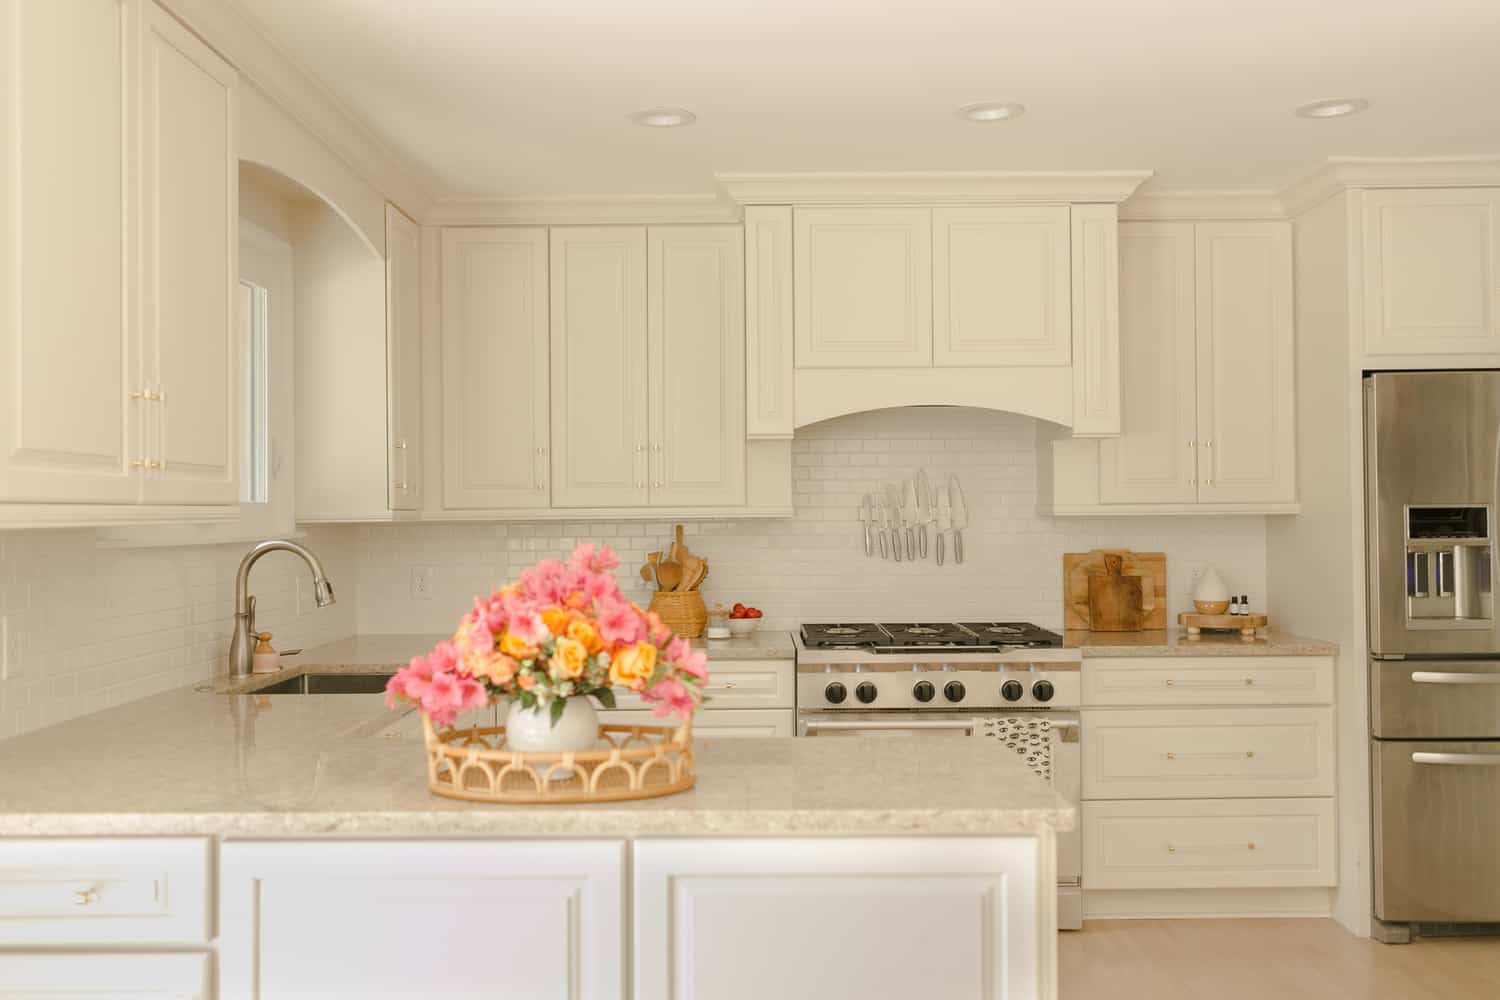 Best Paint For Kitchen Cabinets, Can You Paint Kitchen Cabinets If They Are Not Real Wood